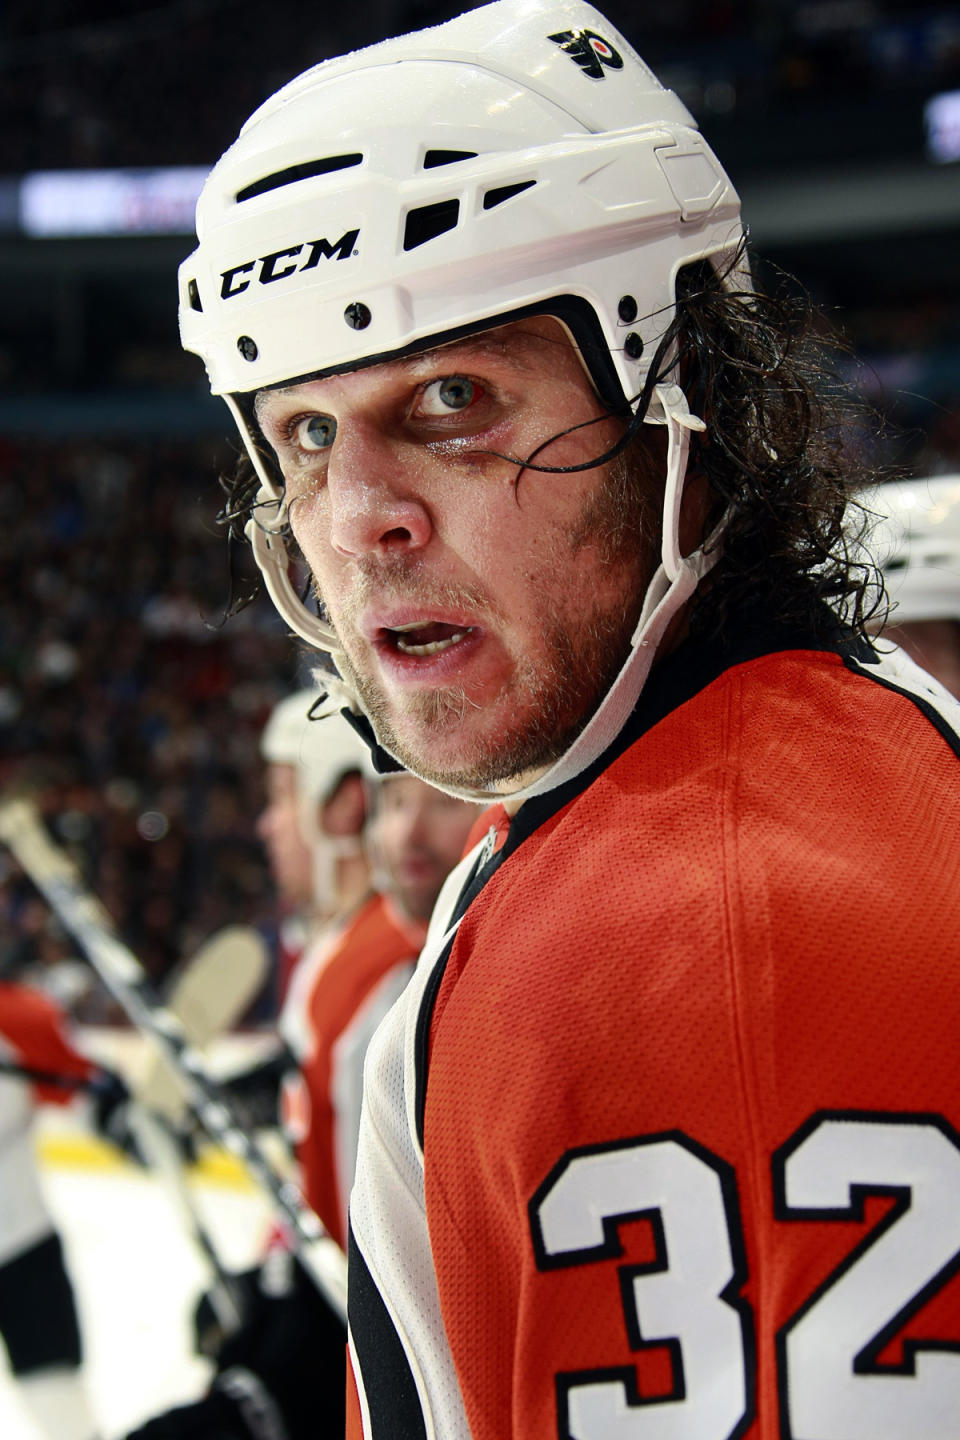 Cote during his playing days with the Flyers, in December 2008. - Credit: Jeff Vinnick/Getty Images